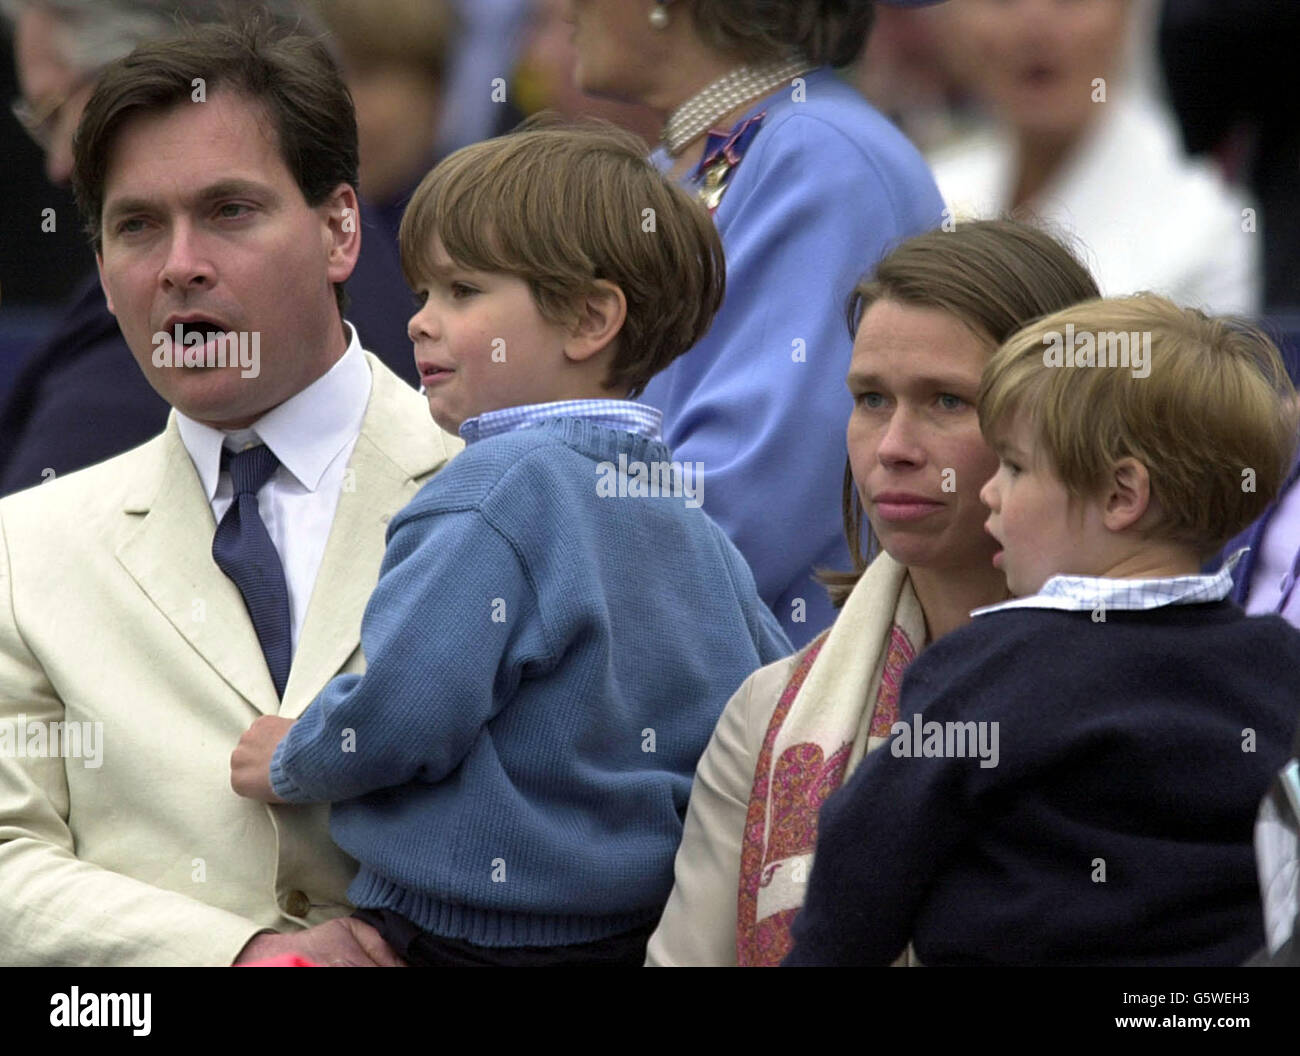 Princess Margaret's daughter, Lady Sarah Chatto, with her husband Daniel Chatto and children in the VIP stand watching the Queen's Golden Jubilee parade. Stock Photo